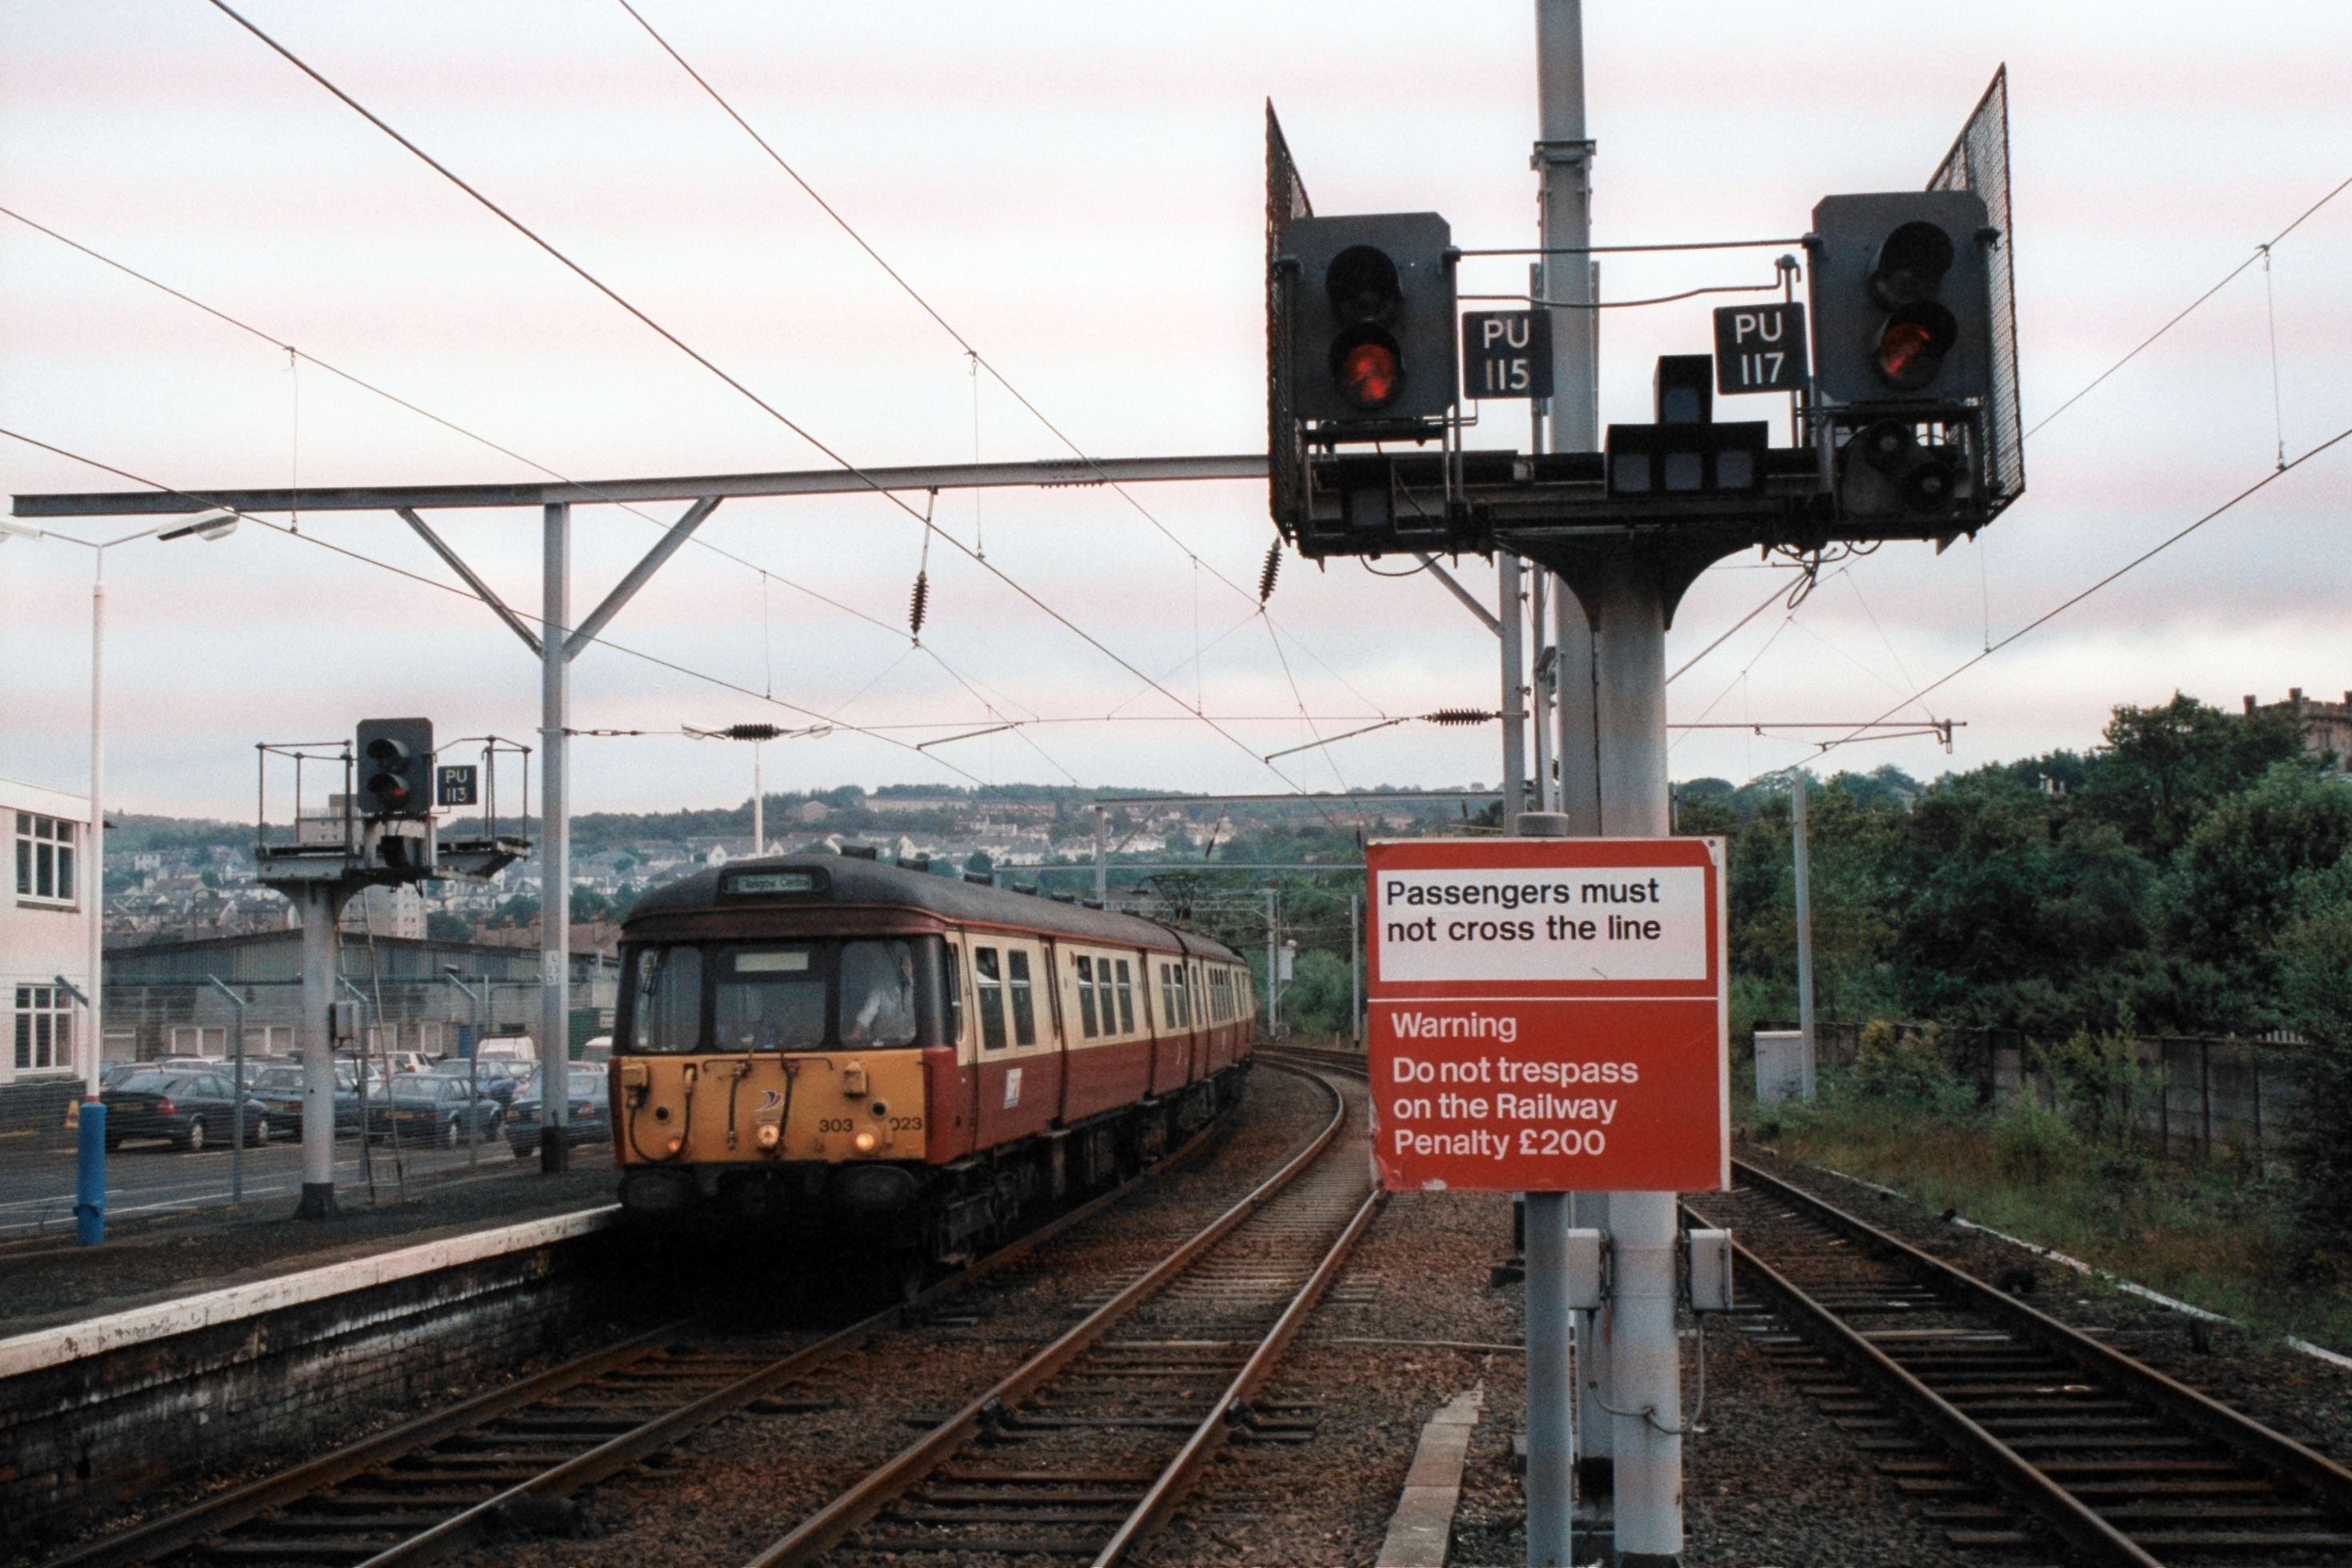 [
303023 arriving at Gourock.  03 July 1999.
        ]